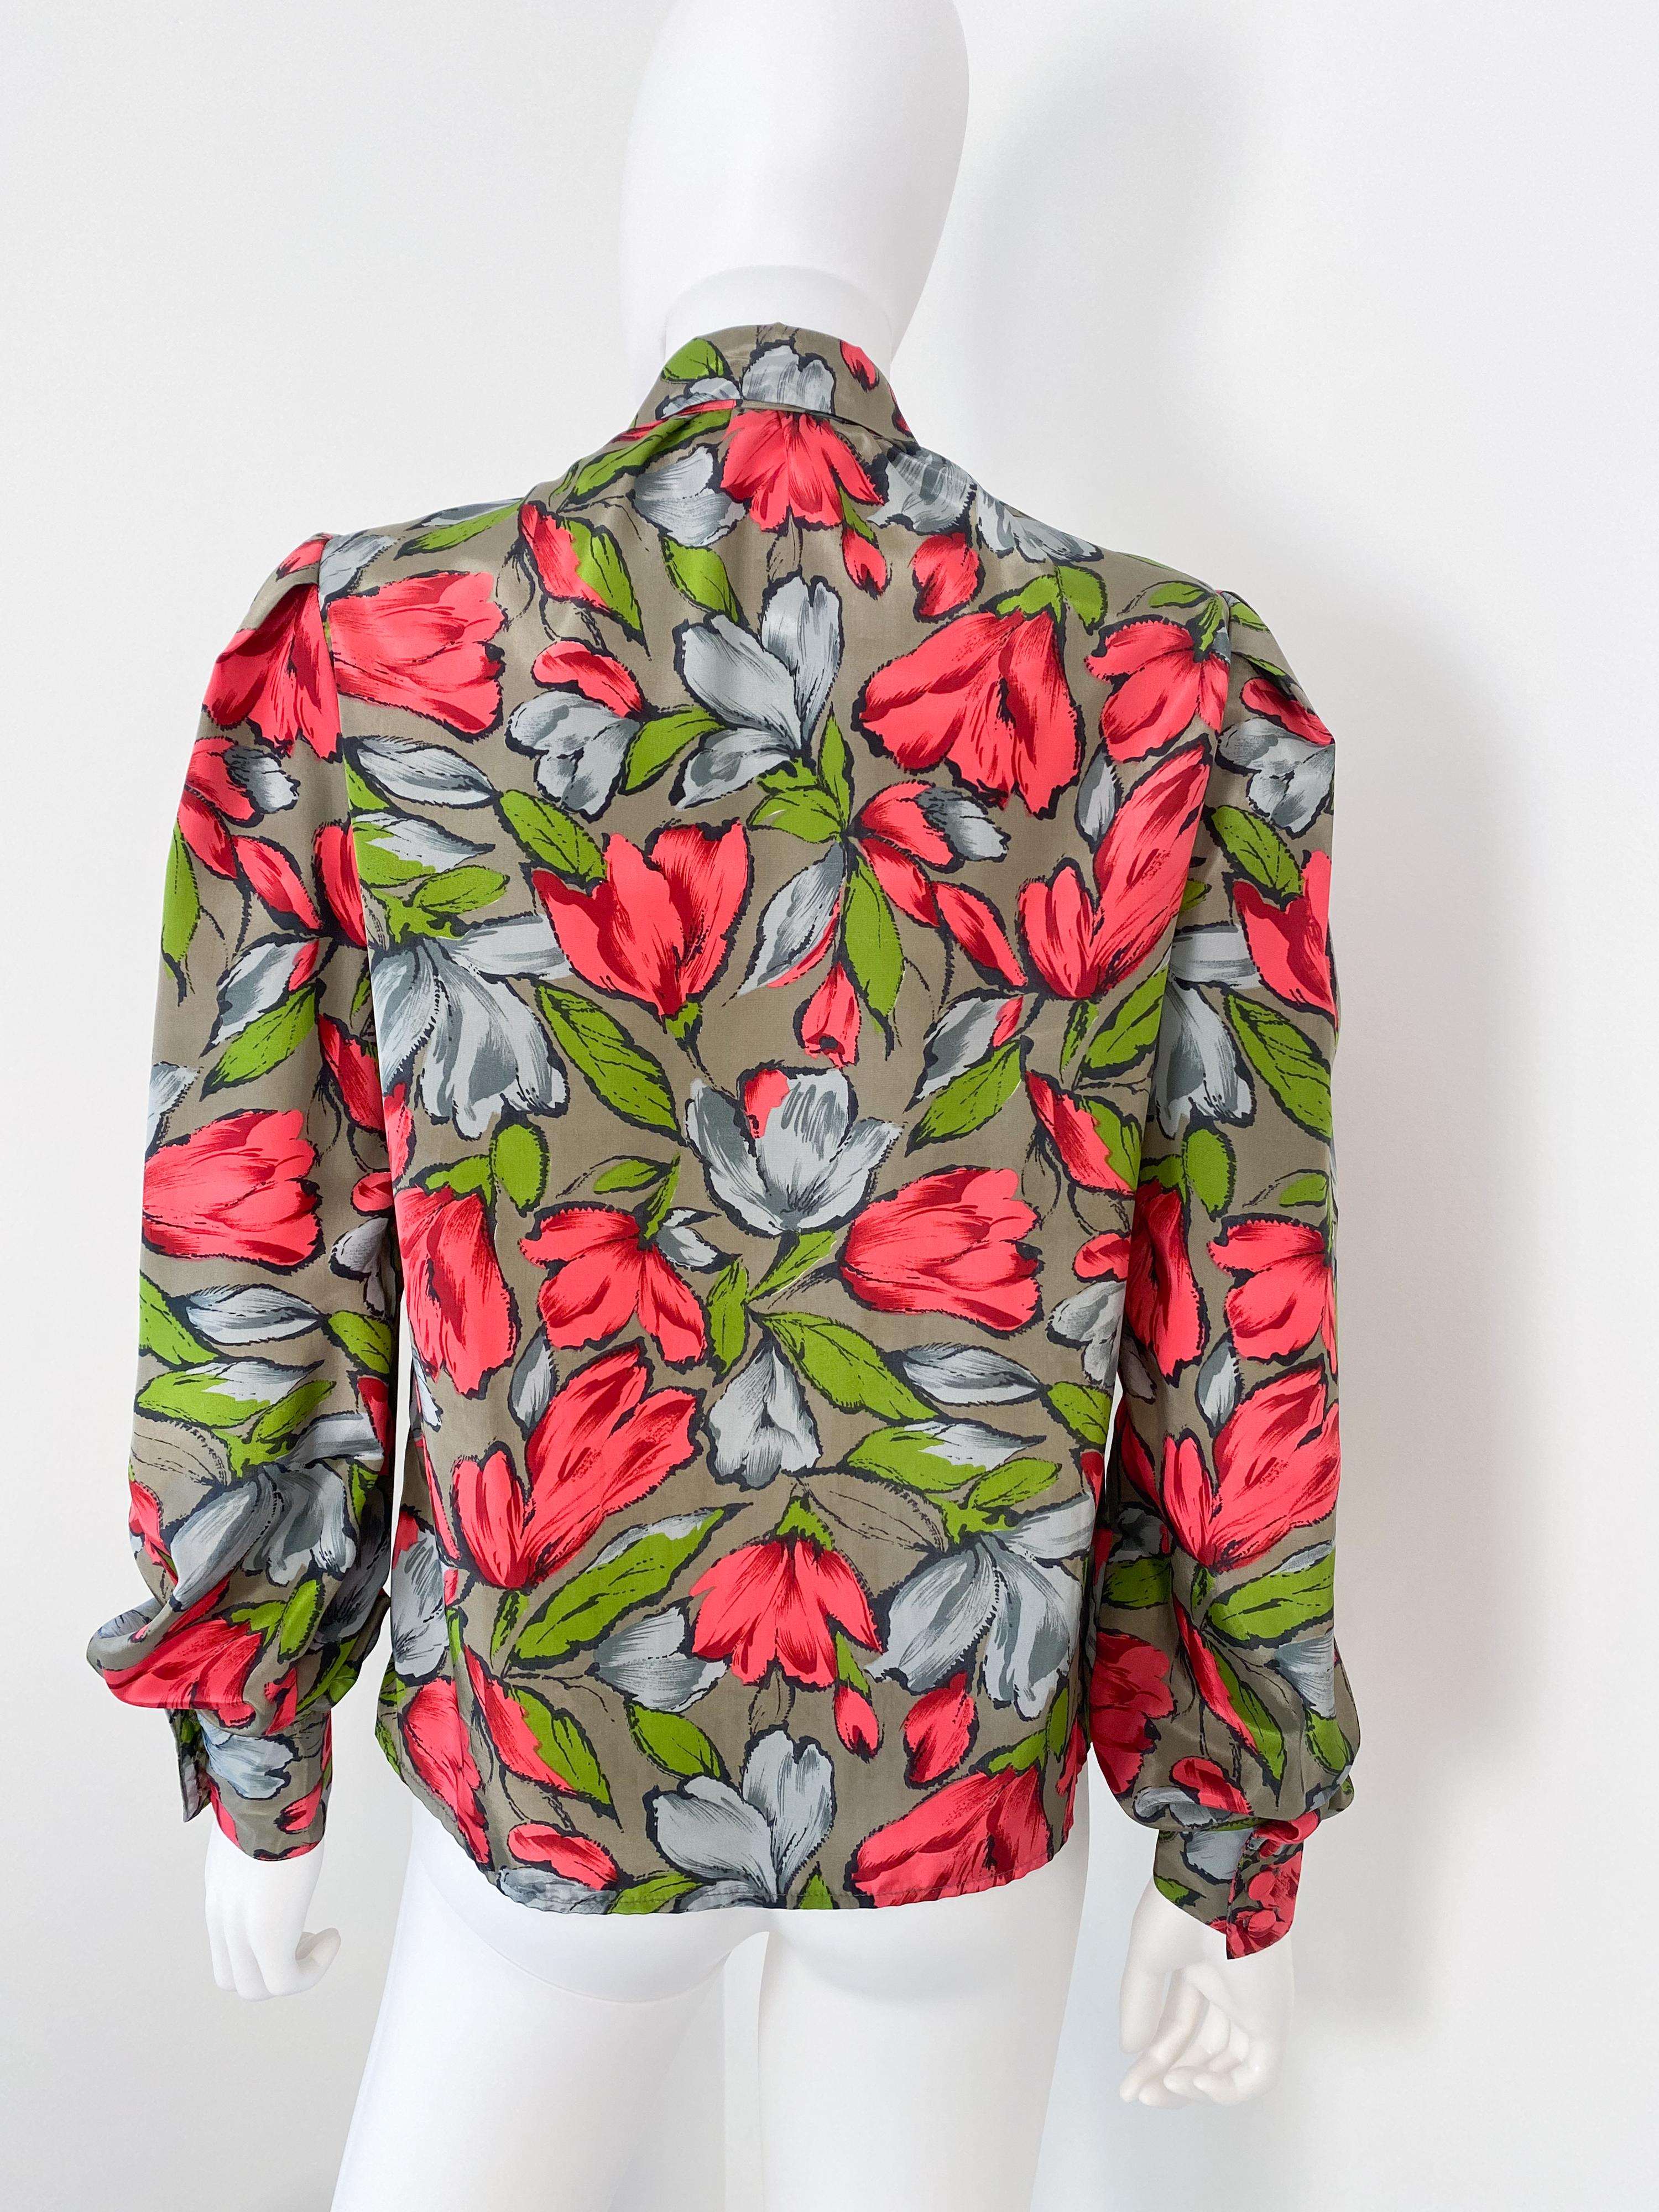 Vintage 1980s Silky Polyester Blouse Top Red and Gray Flowers Size 8/10 For Sale 5